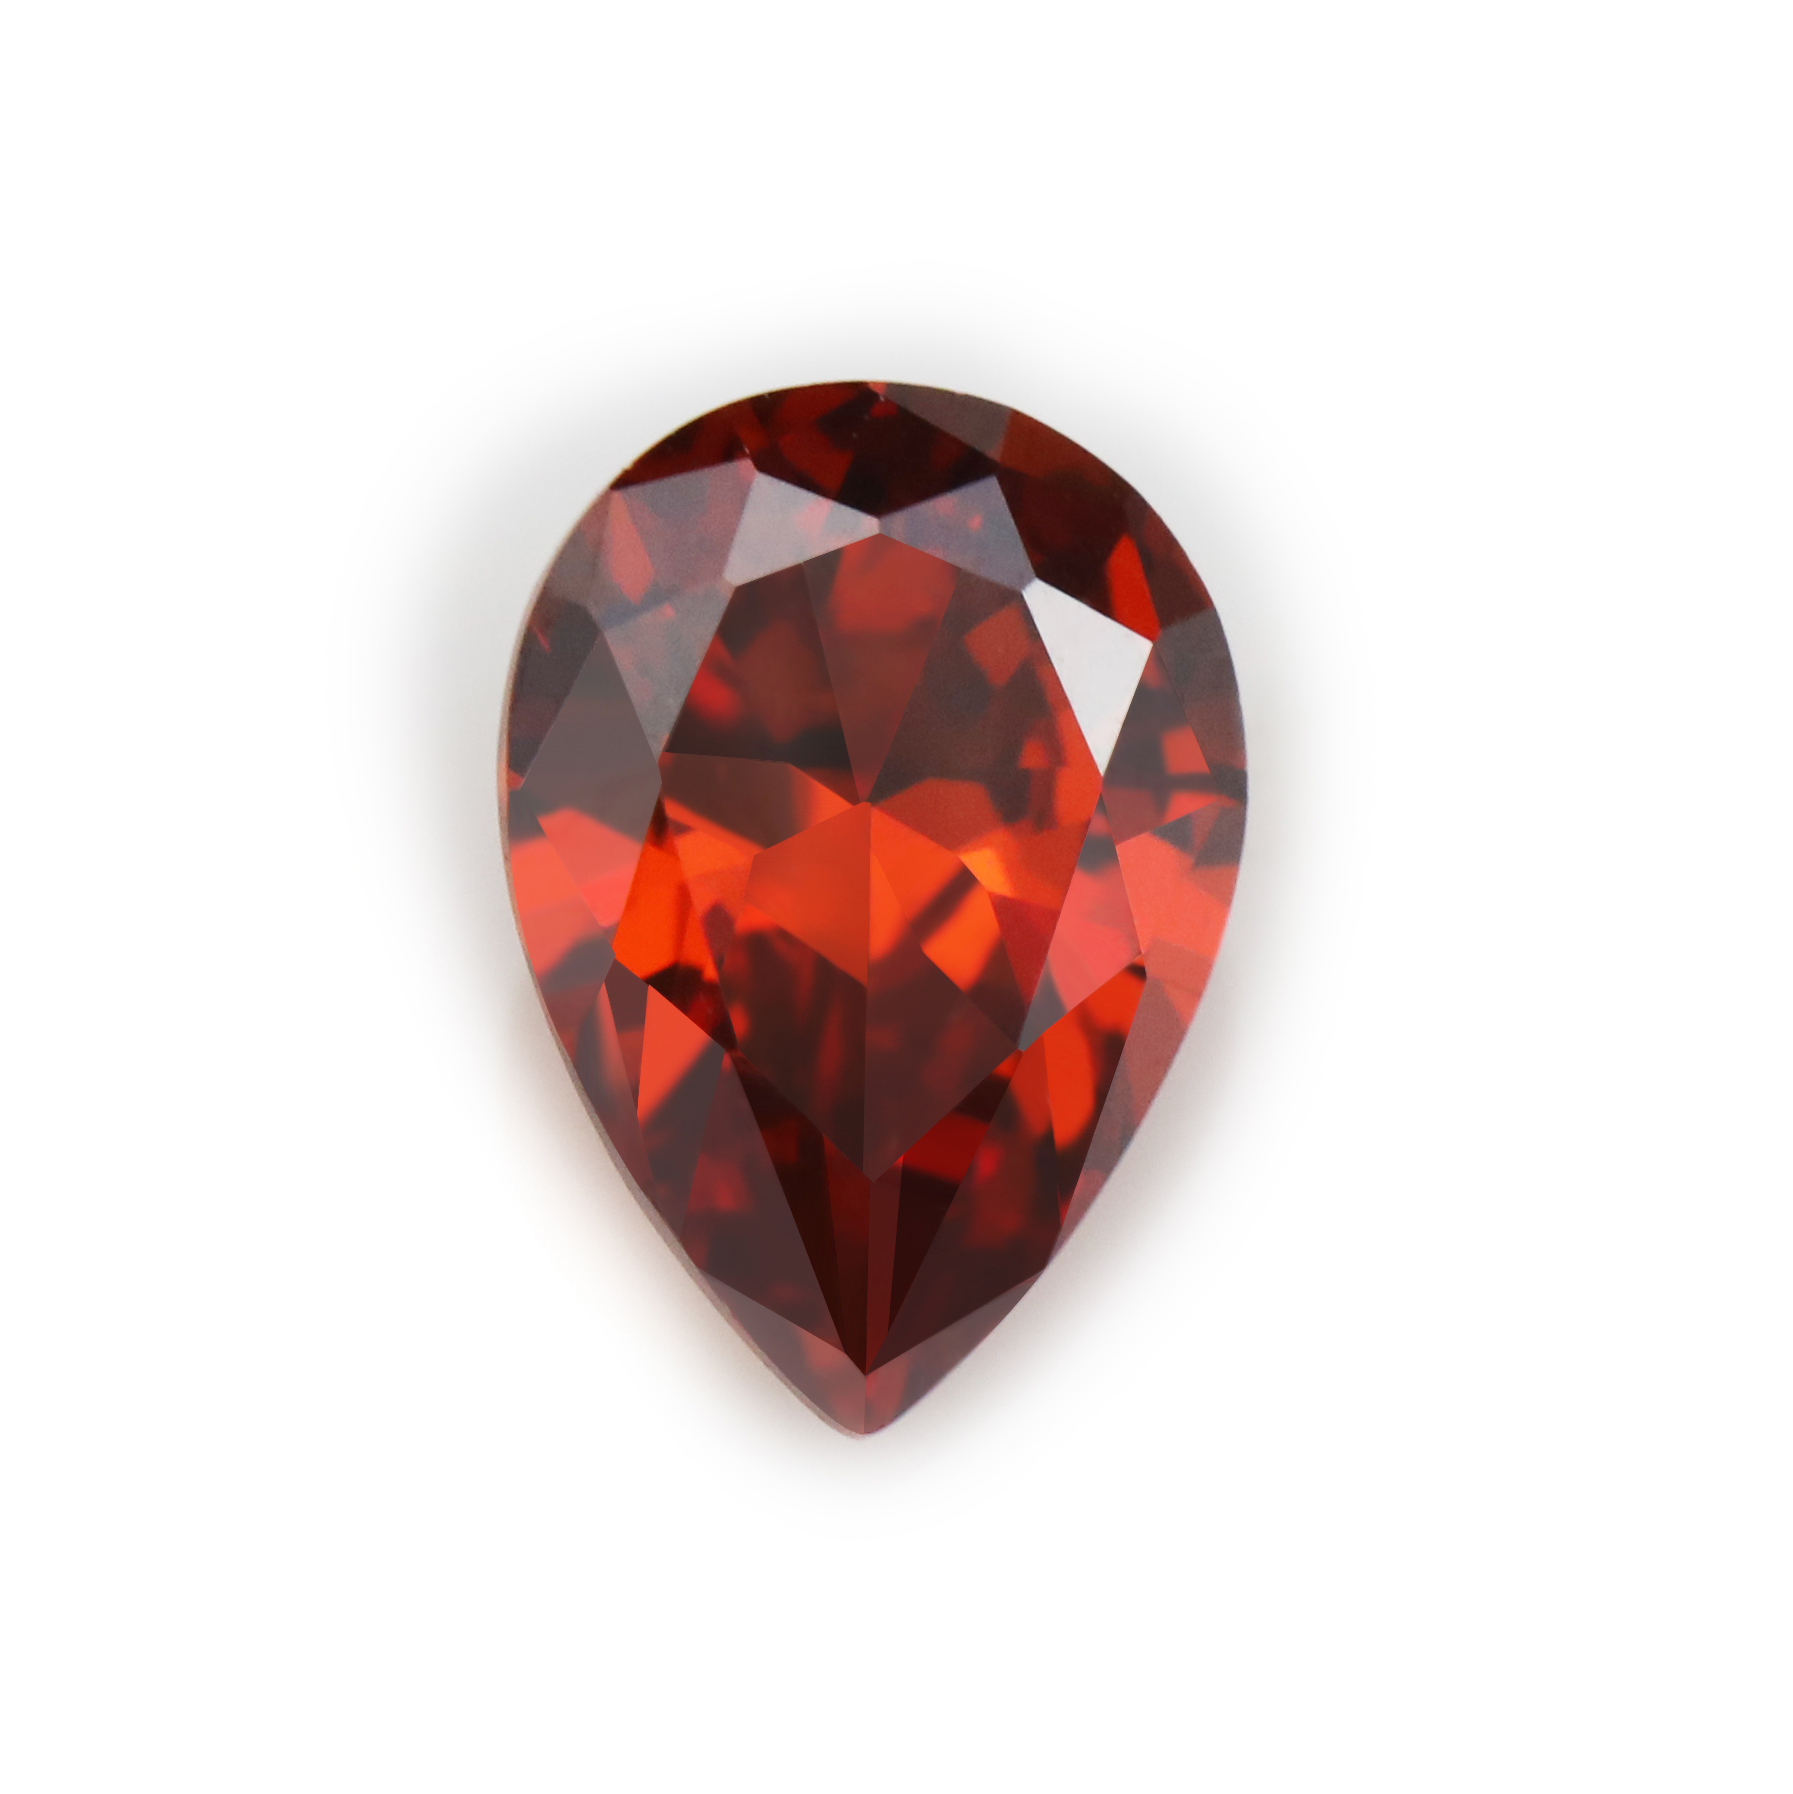 5Pcs January February April June August October November Imitation Garnet Birthstone Pear Faceted Cubic Zirconia CZ Stone DIY Loose Stone Supplies 4150025-1 - Click Image to Close